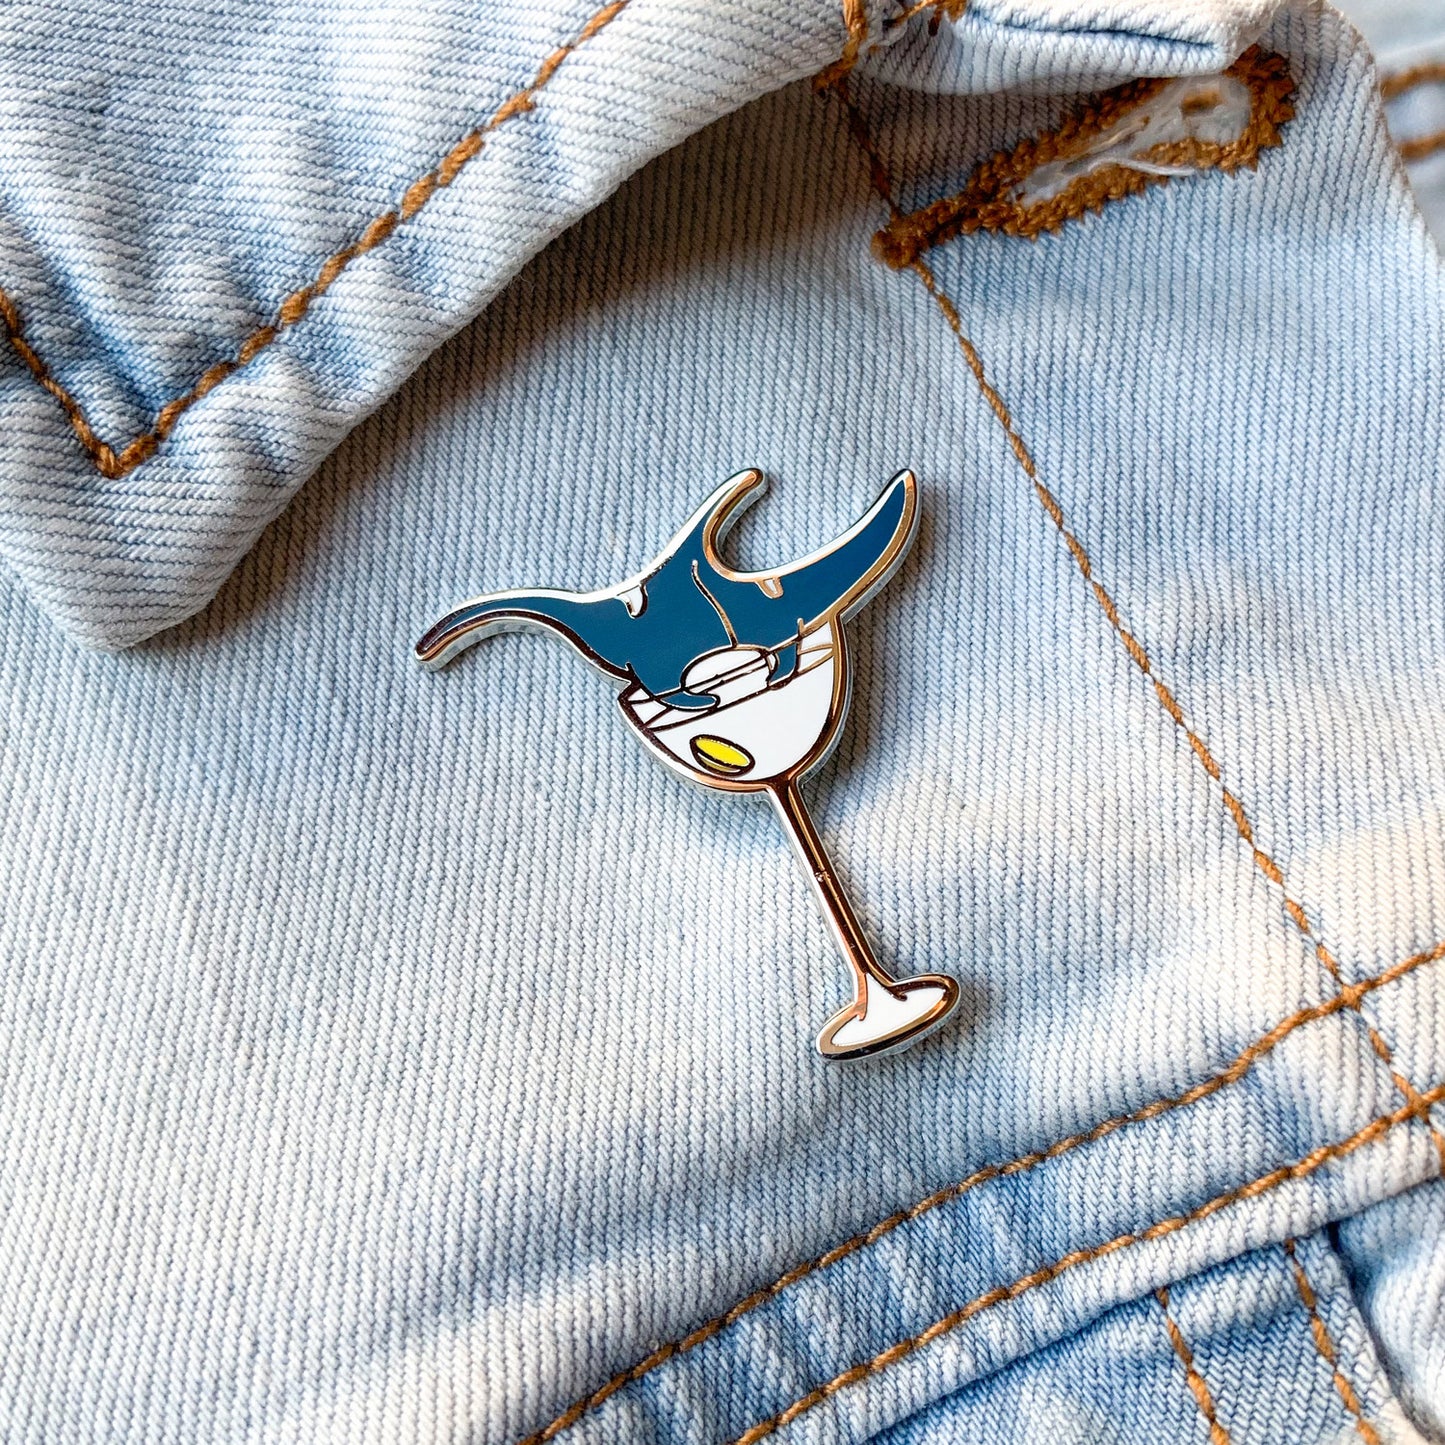 Manta Ray & Vesper Martini Cocktail Hard Enamel Pin by Cocktail Critters